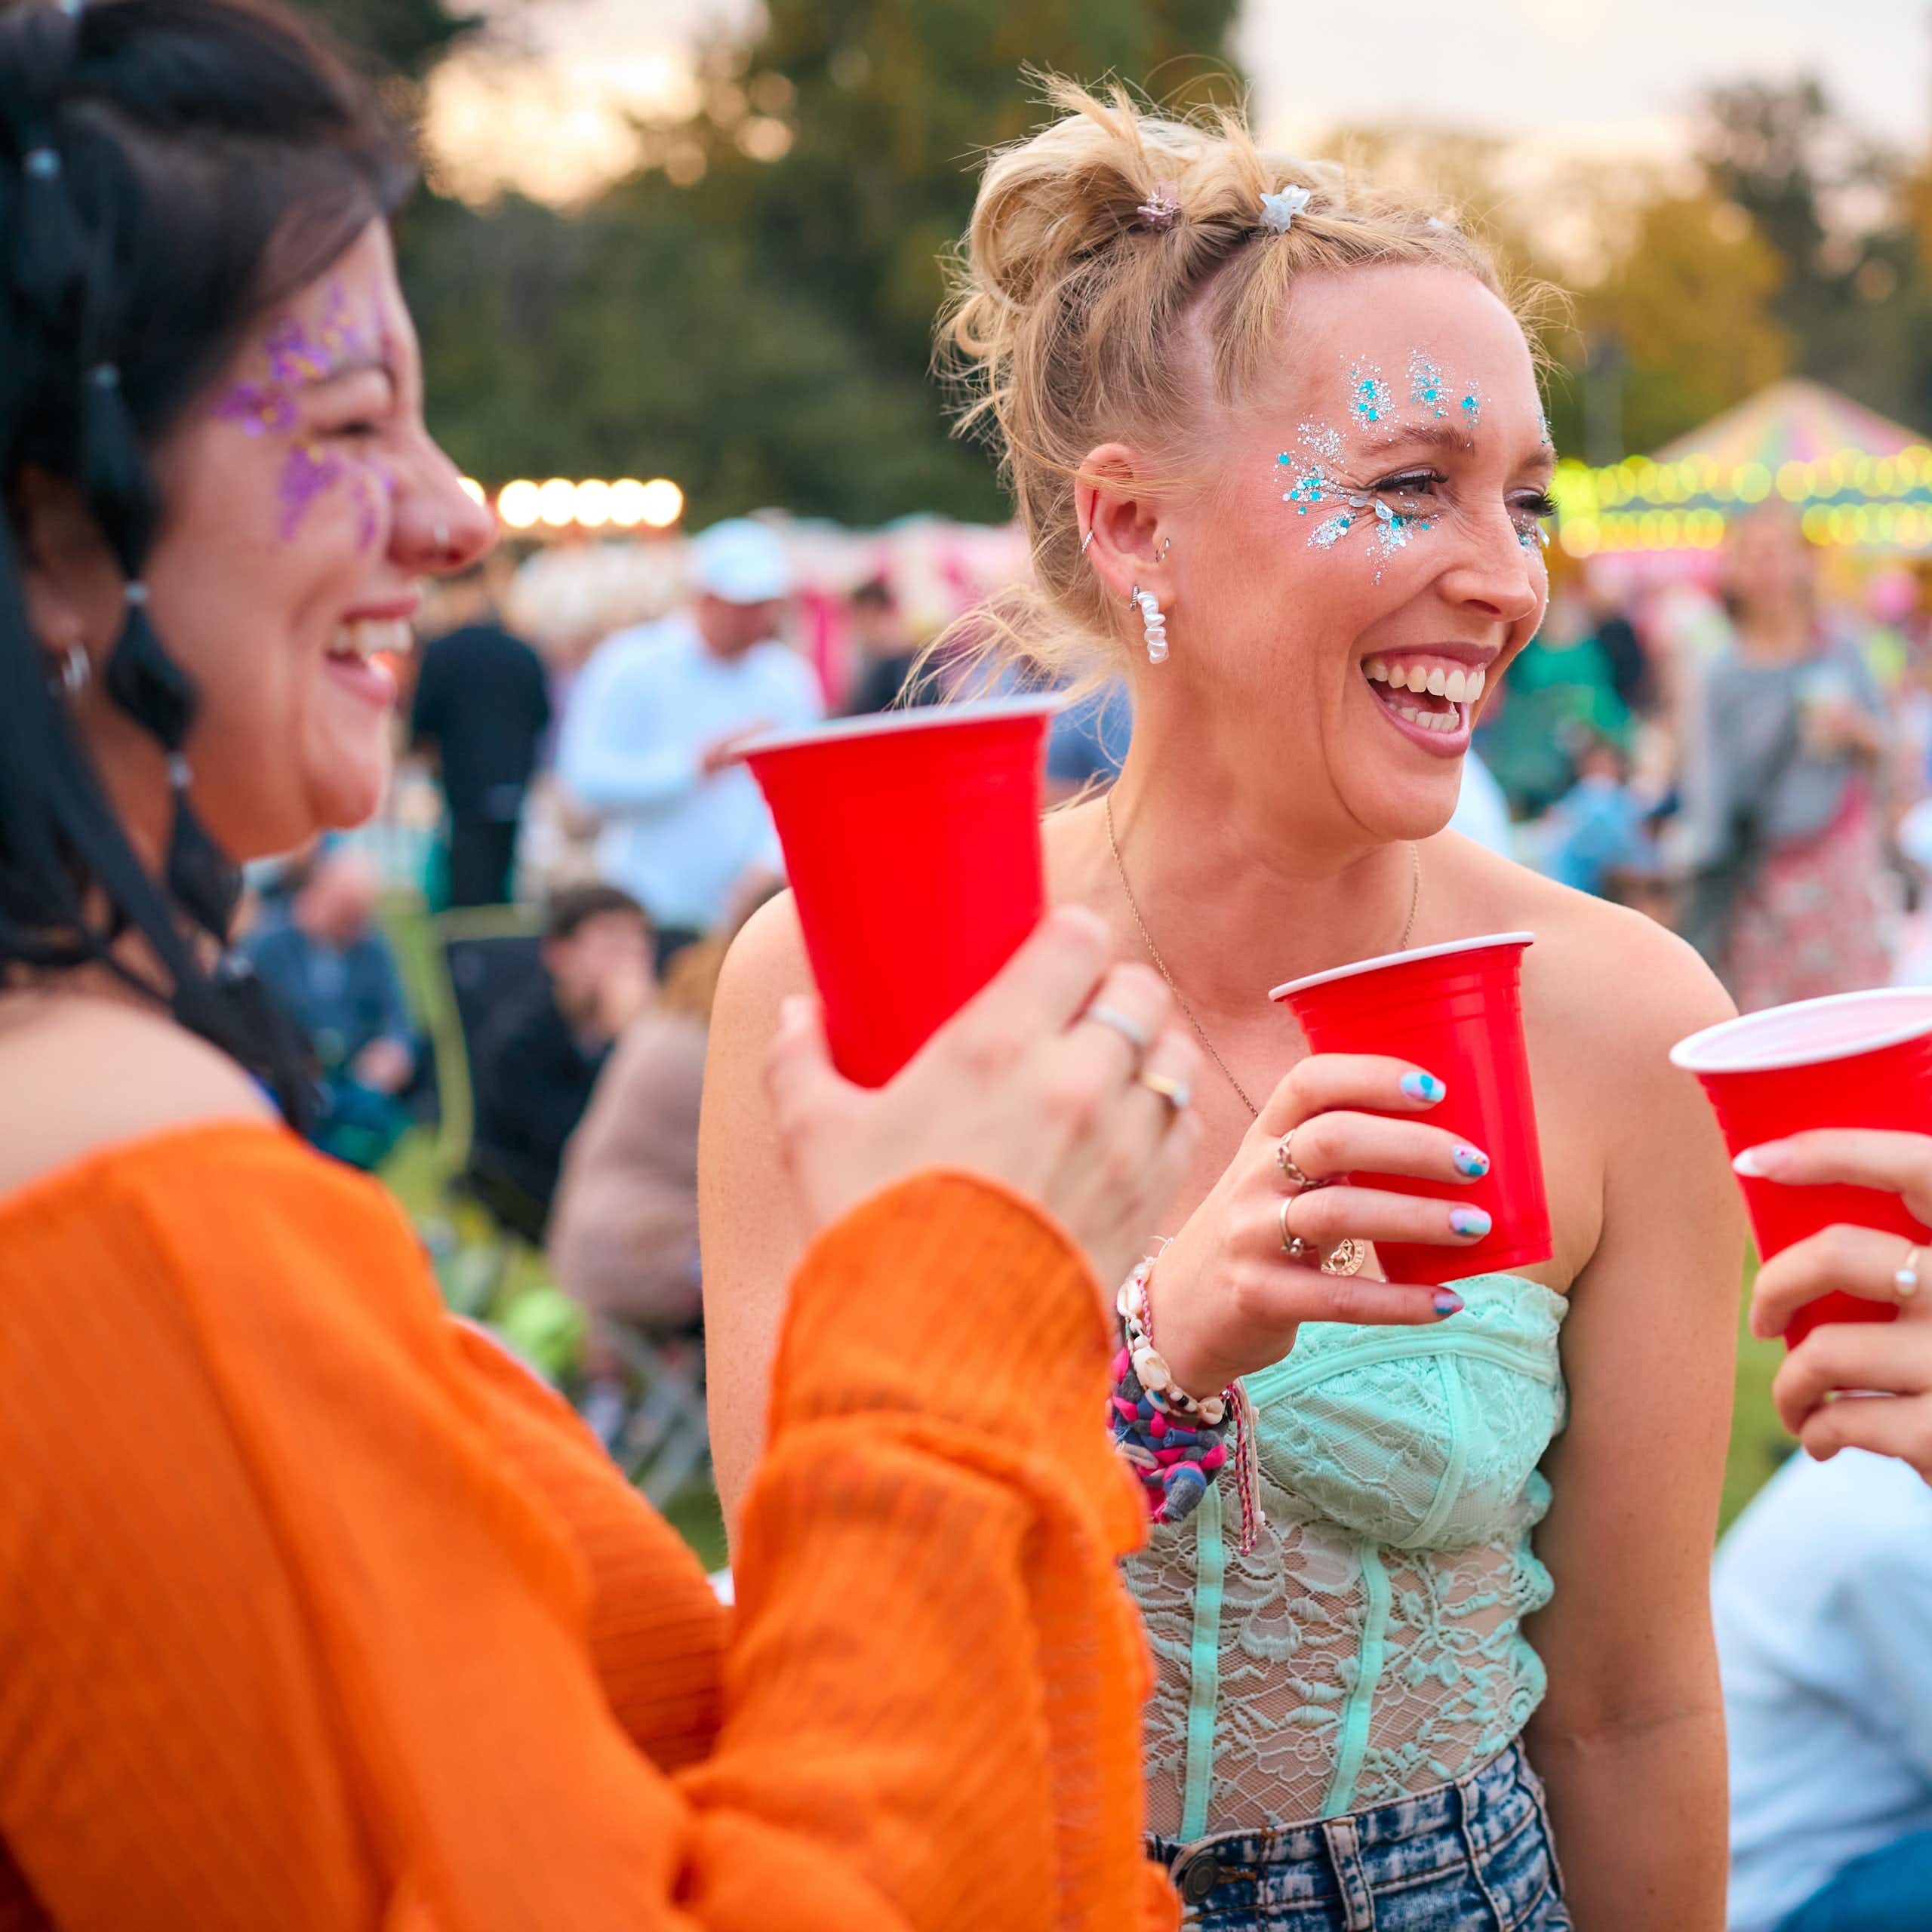 Headed to Glasto? How to stay healthy in the festival heat